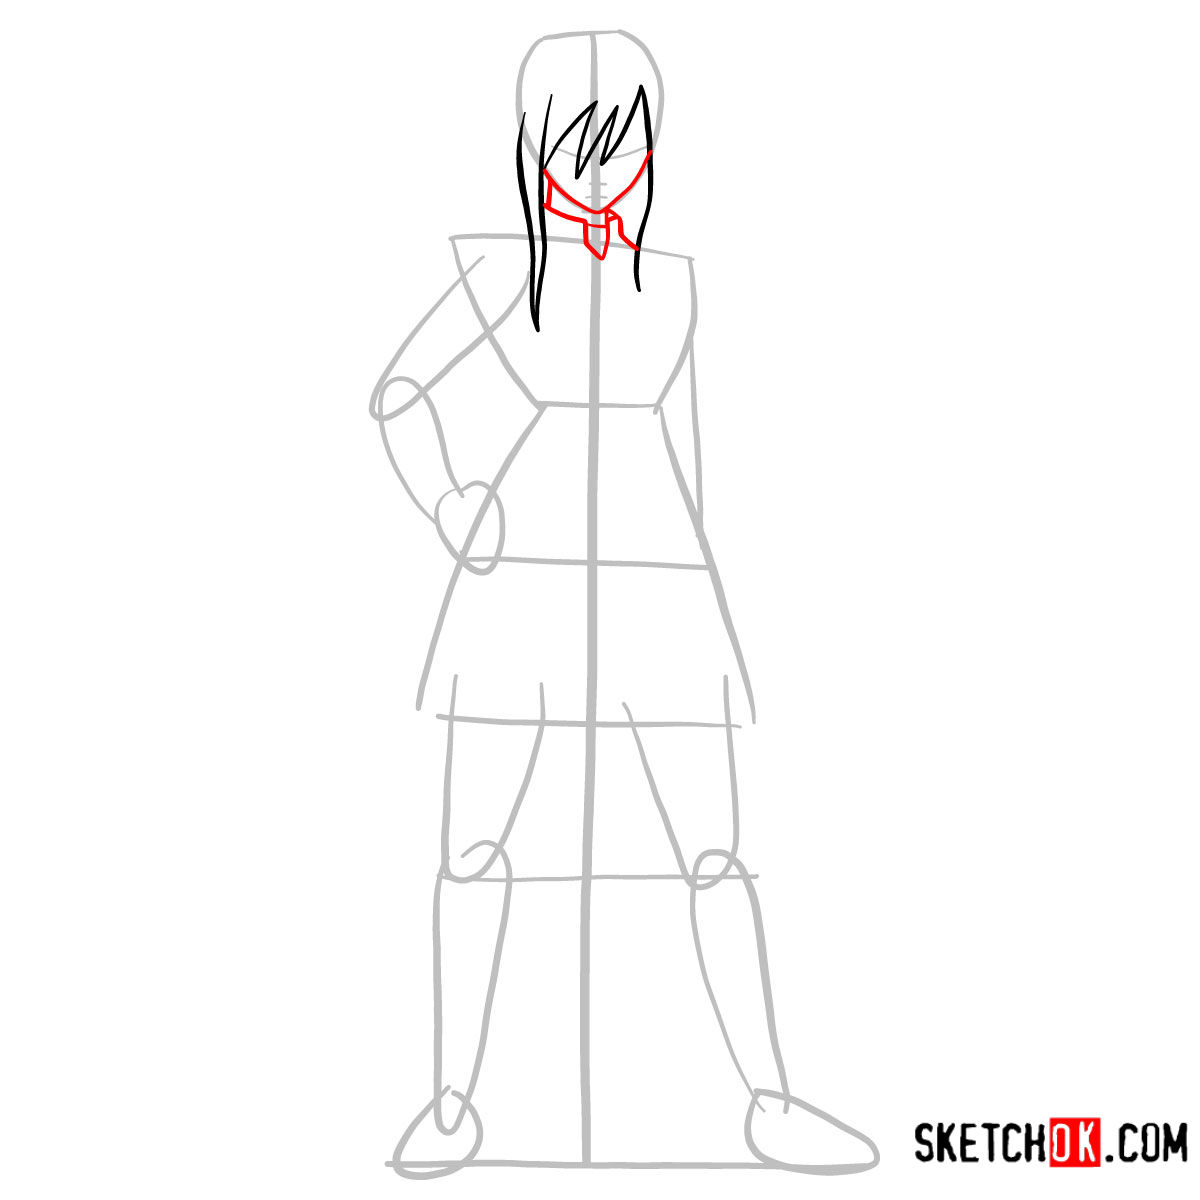 15 steps drawing tutorial of Erza Scarlet (fairy tail) - step 04